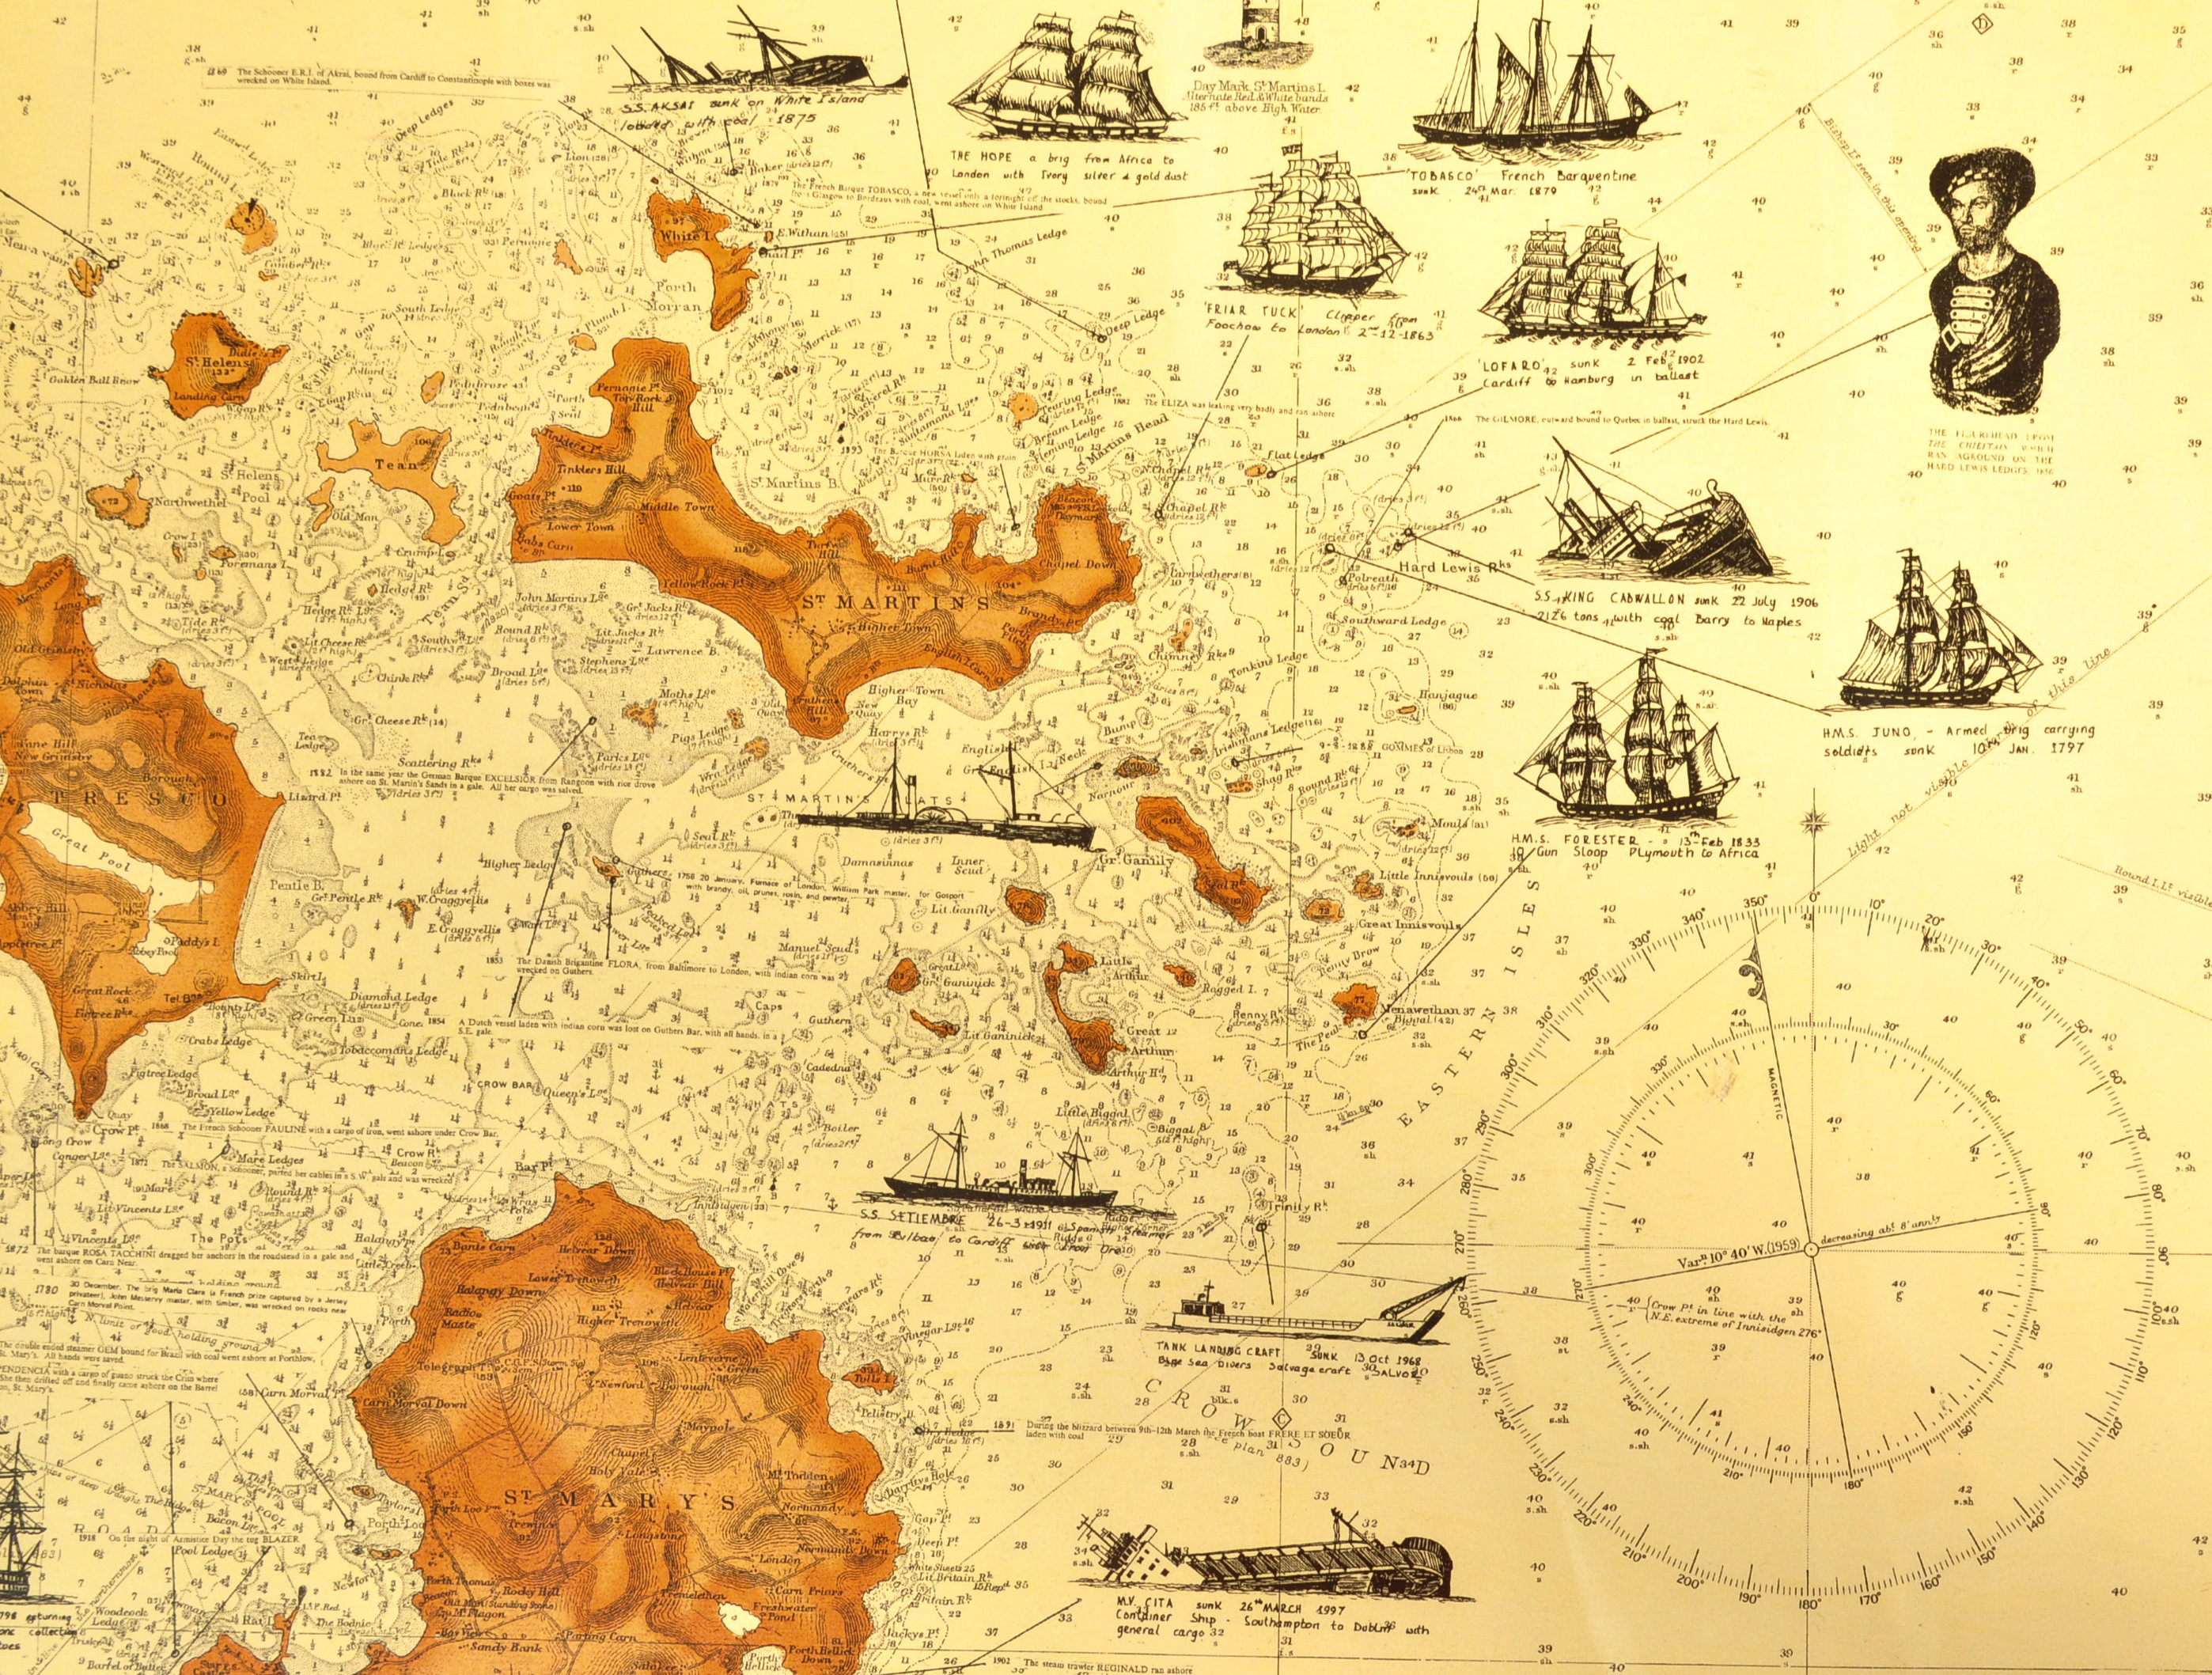 THE SCILLY ISLES - PRINTED SURVEY'S MAP - Image 5 of 5